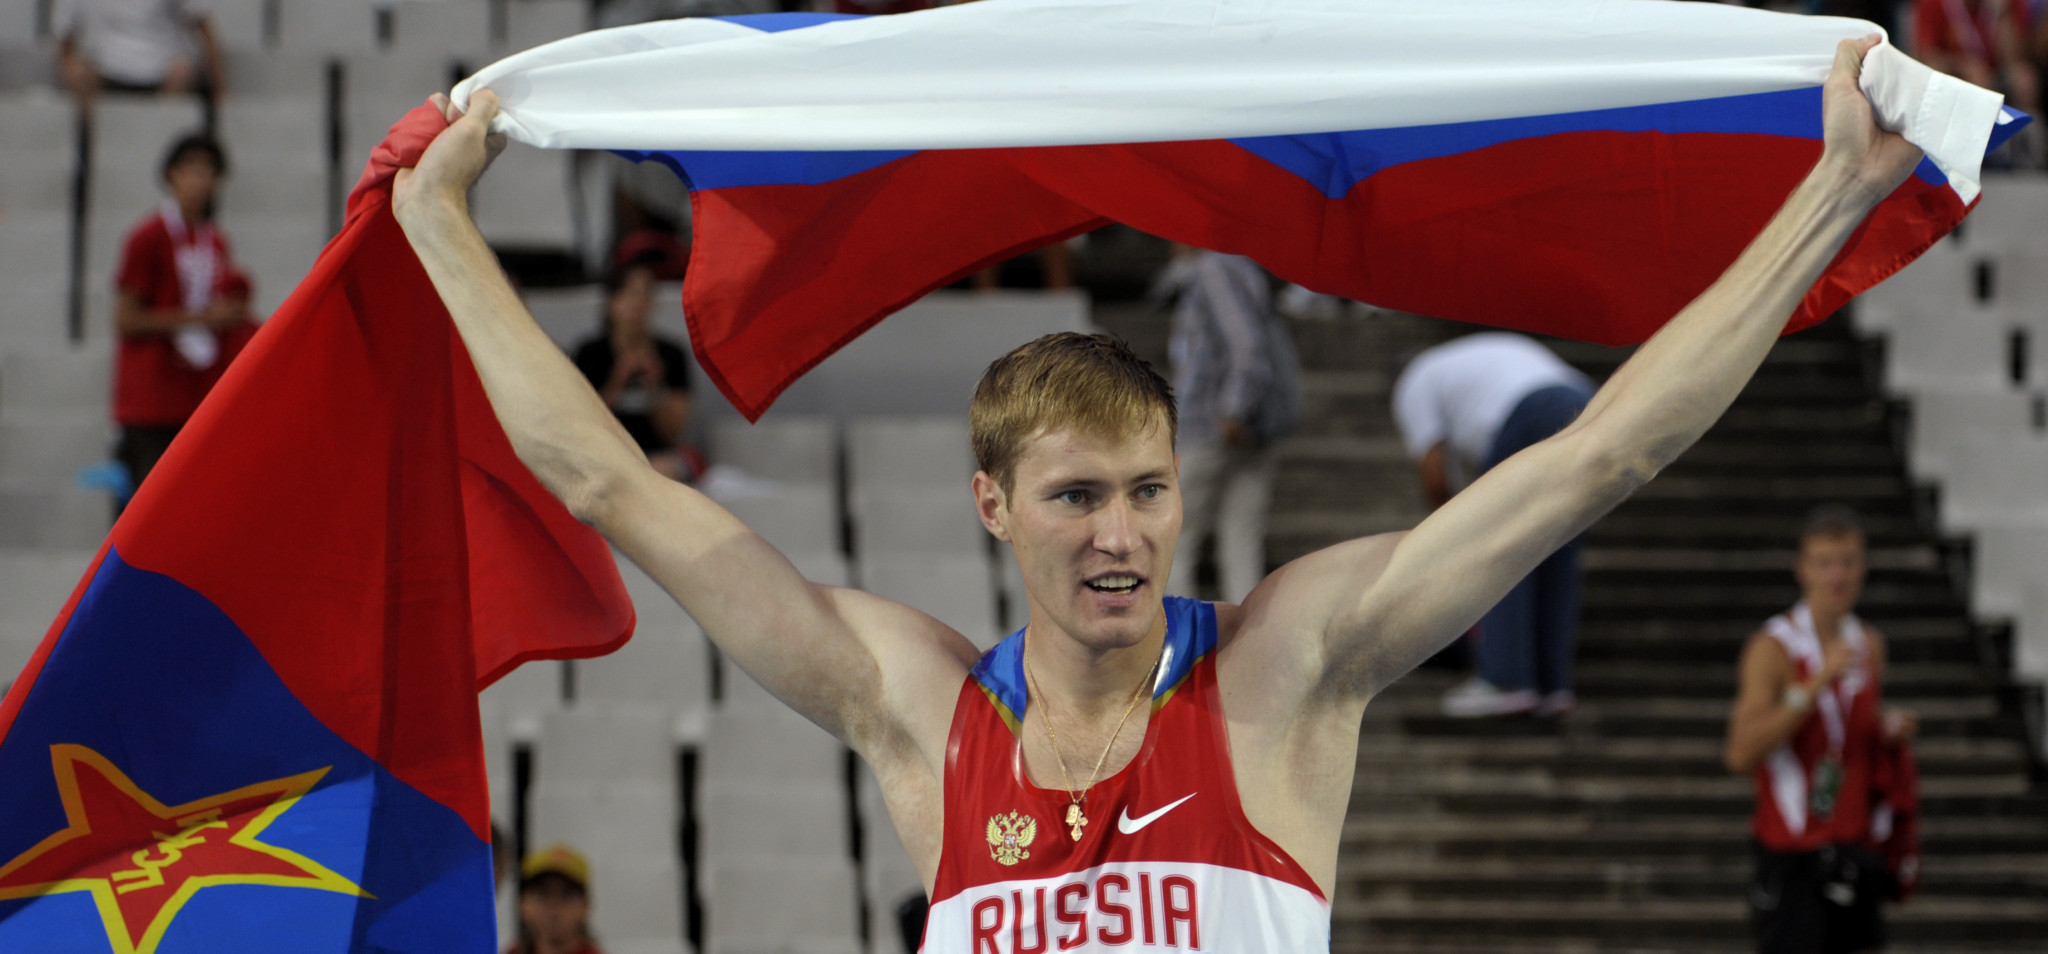 The 2010 European high jump champion Alexander Shustov is planning to continue to try to overturn a four-year doping ban ©Getty Images